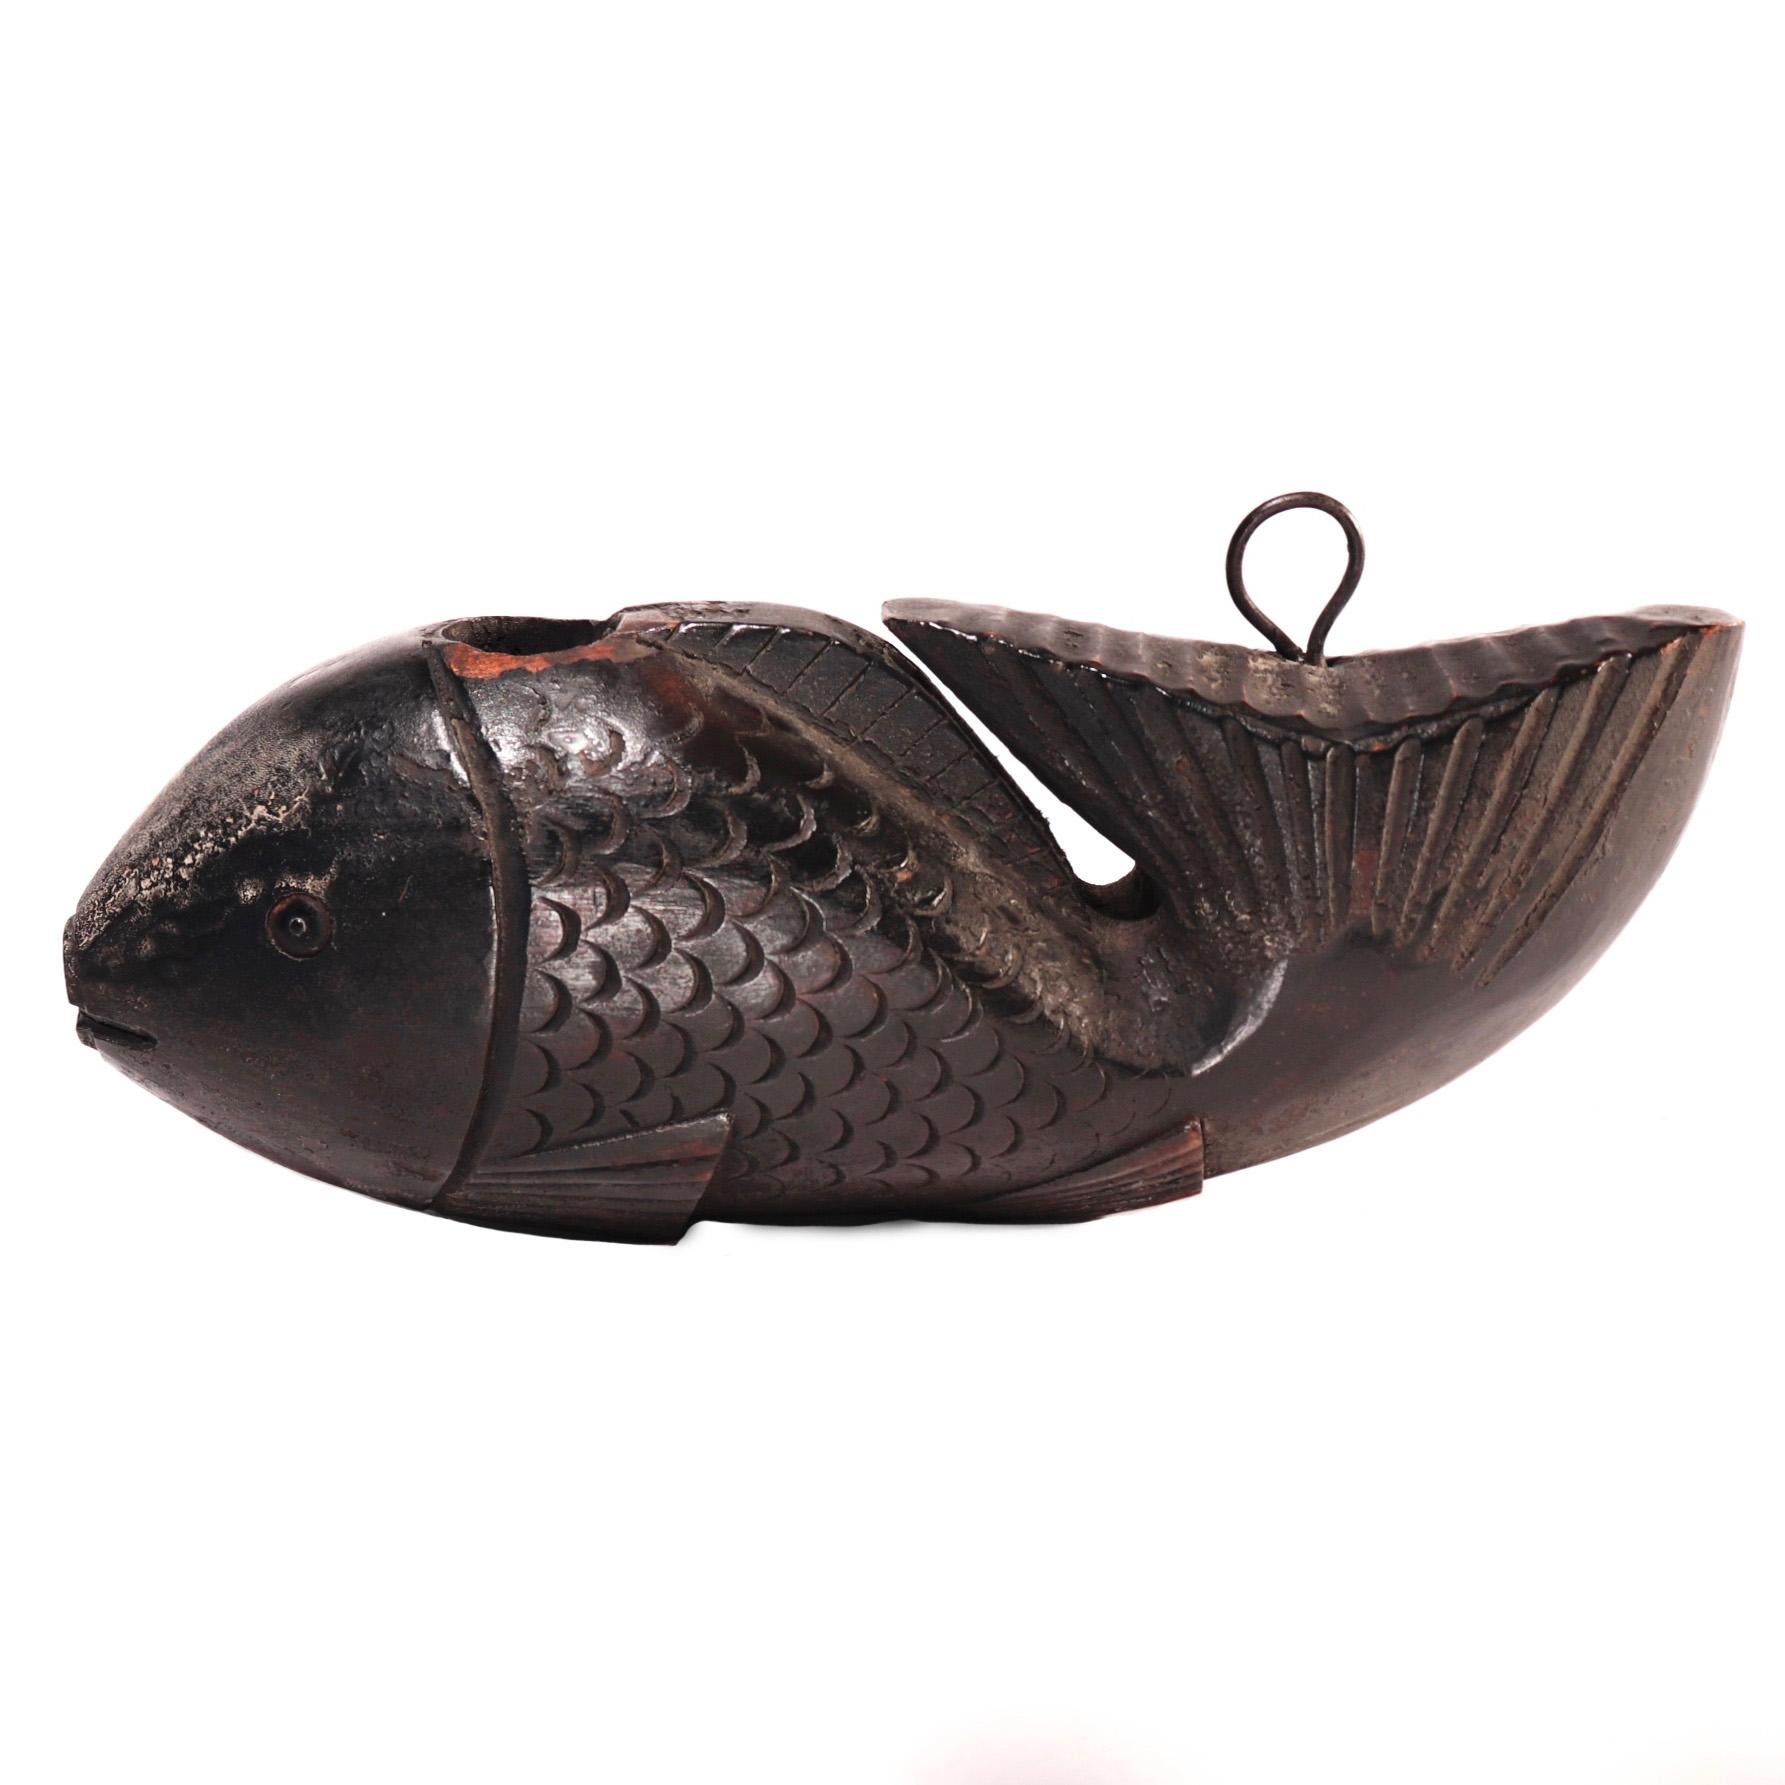 Antique Japanese Yokogi, a fish shaped fulcrum for the pot hook assembly over the hearth, a naively carved Tai (Sea Bream) with large head pierced for the hooked pole and the large tail pointed upward with a metal loop for the cord attachment,